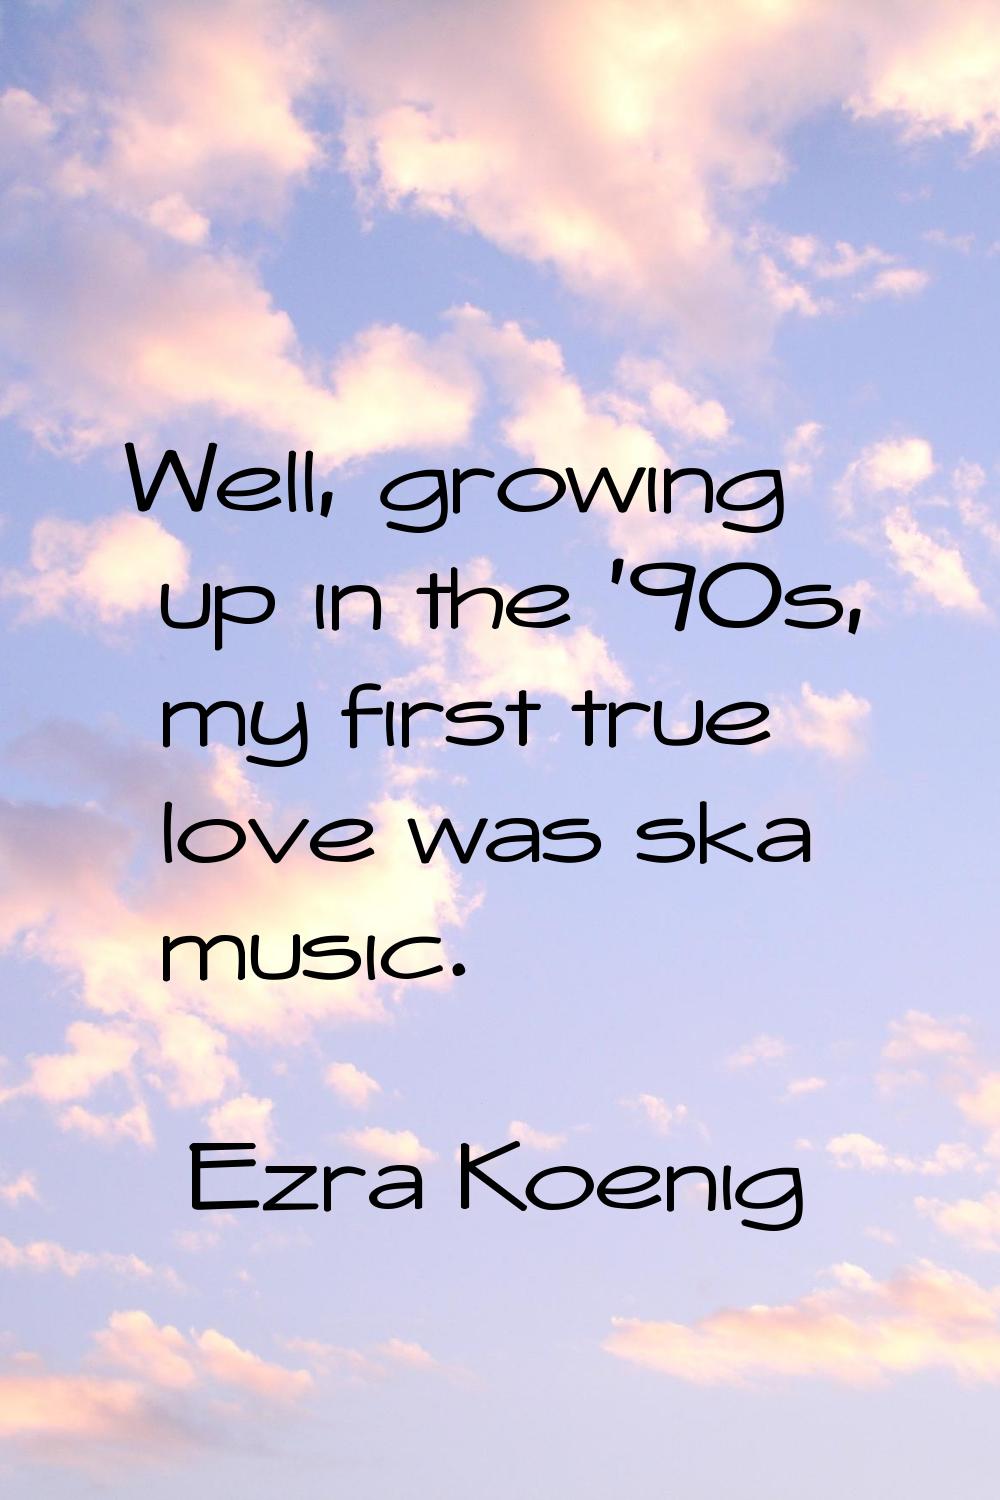 Well, growing up in the '90s, my first true love was ska music.